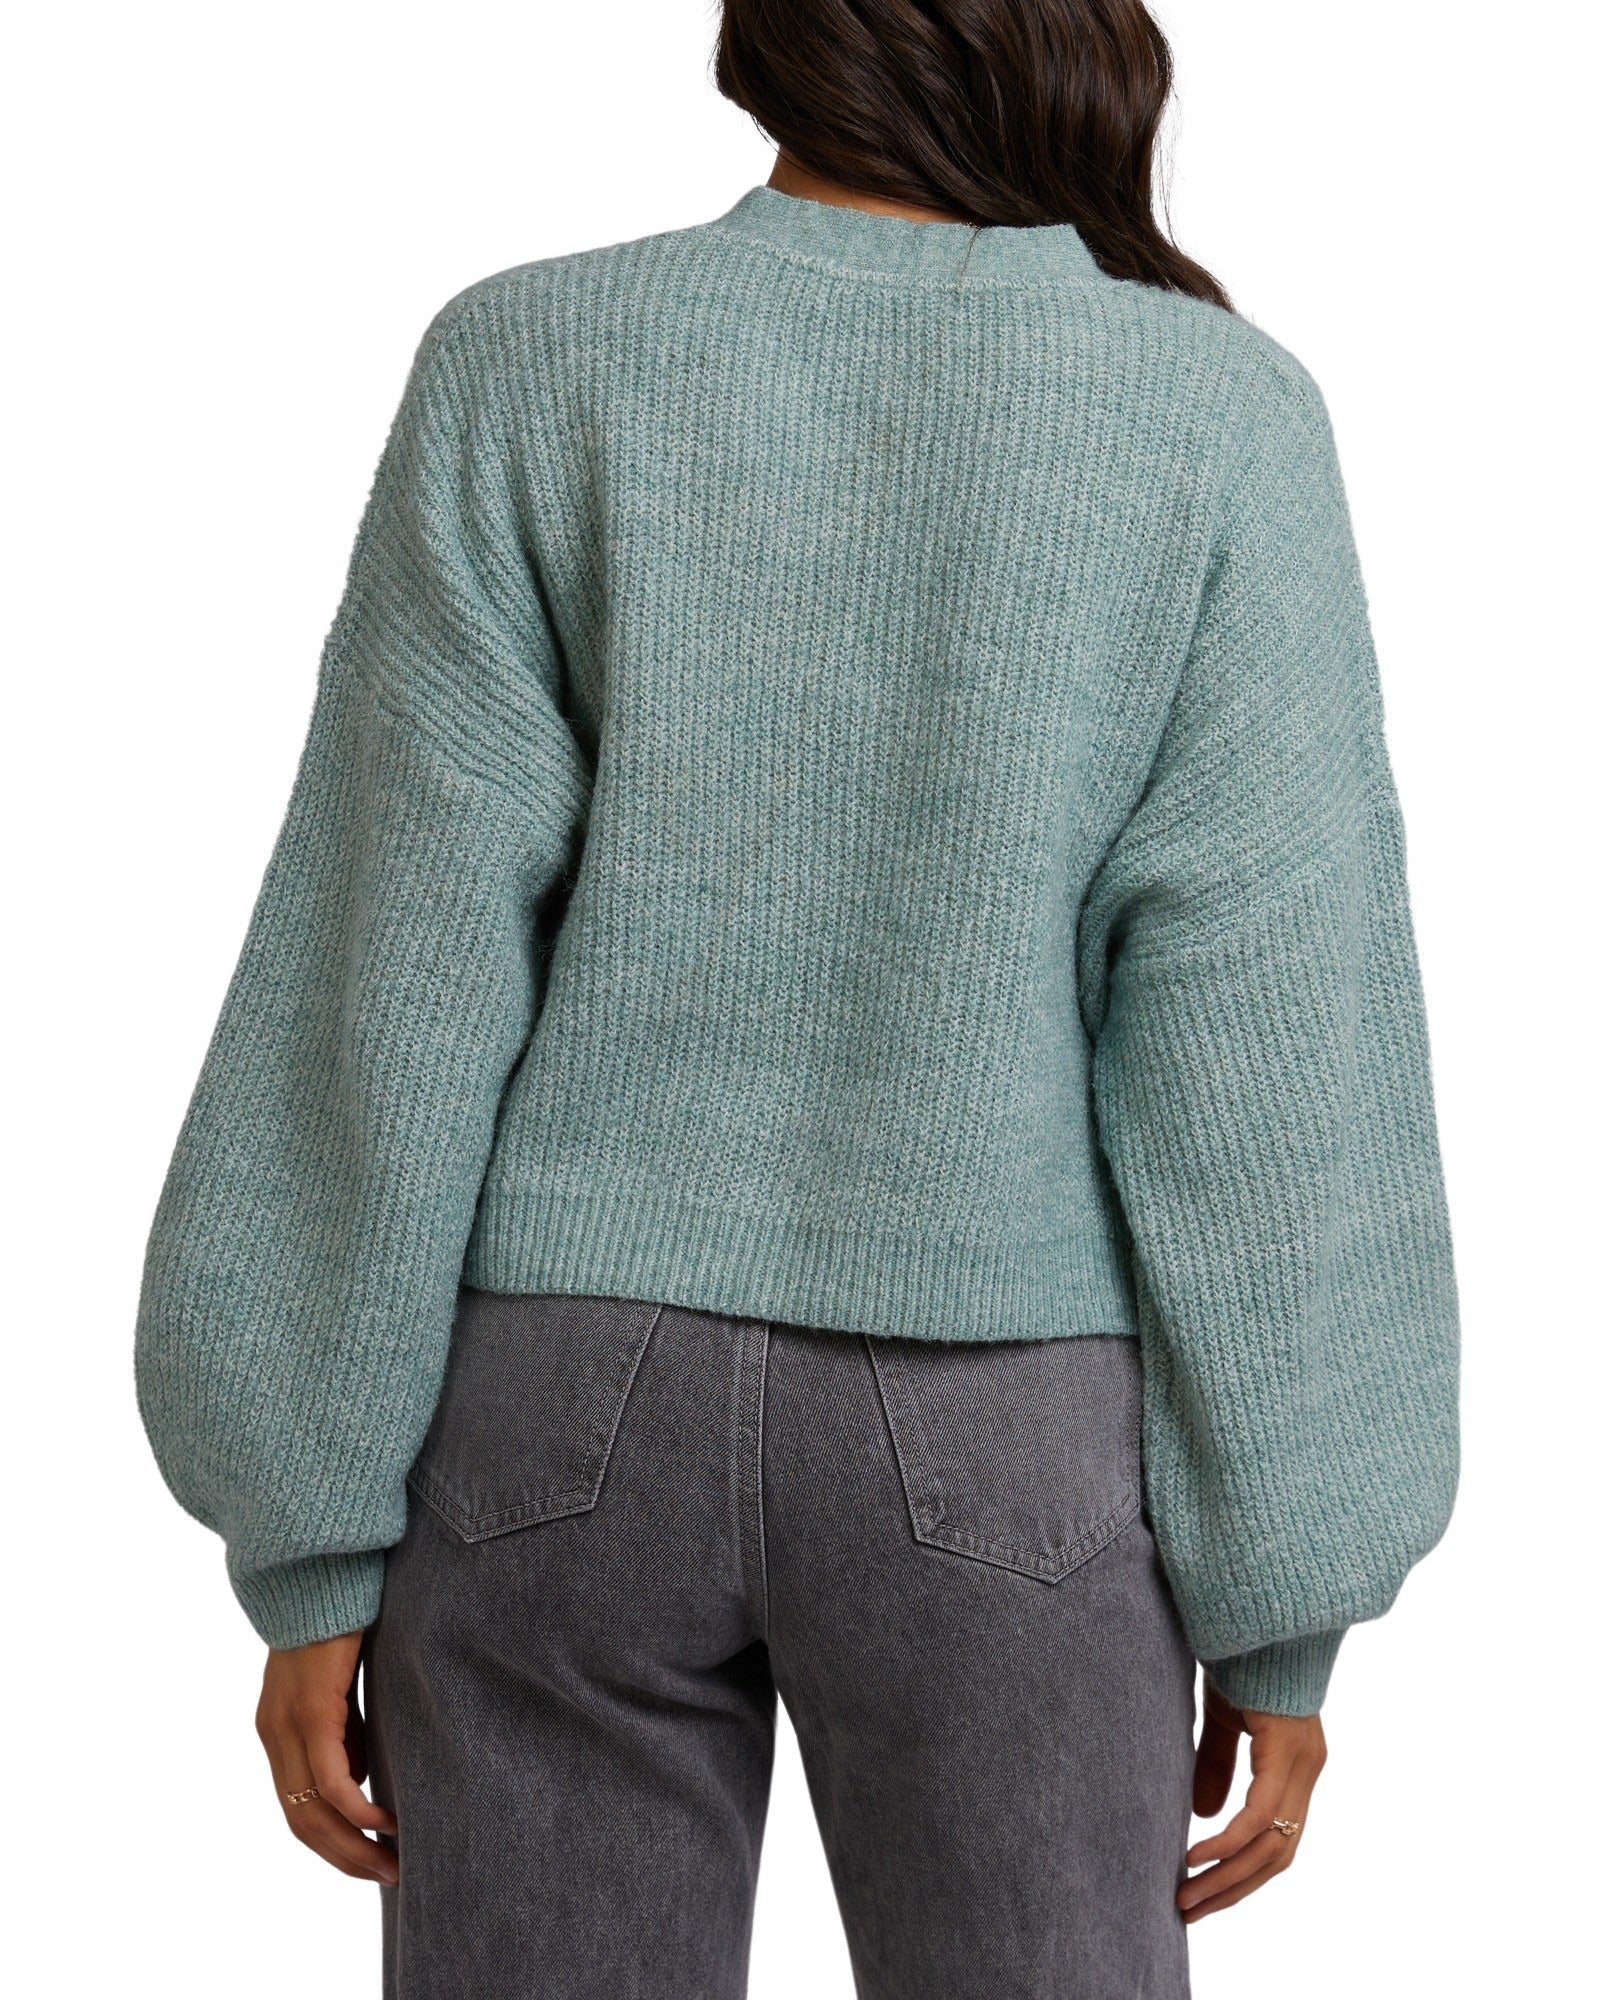 All About Eve - Harmony Cardi - Sage